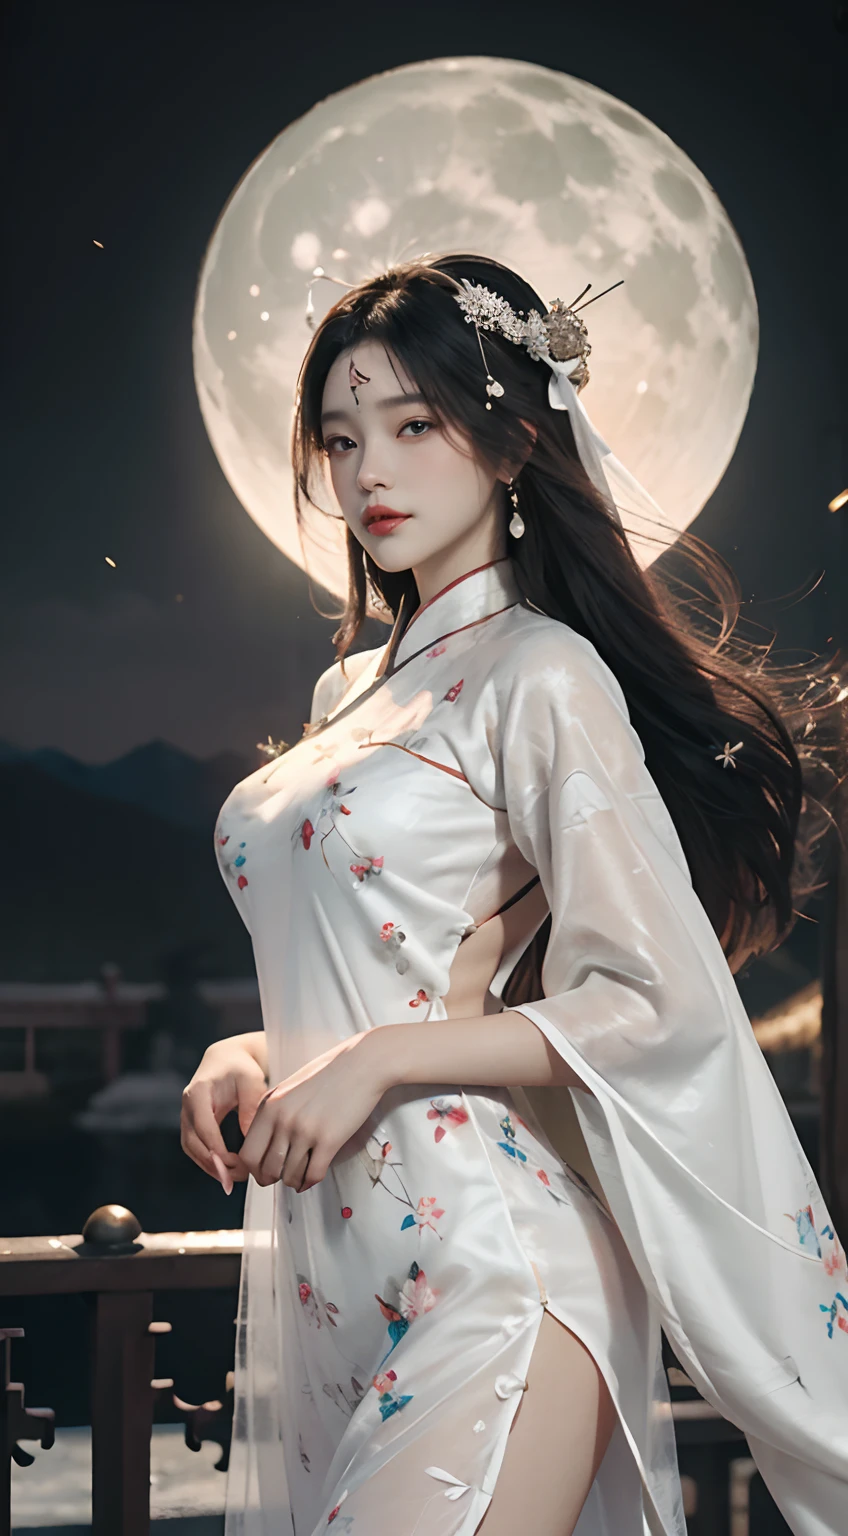 Chang'e，(((White Hanfu)))，(((White period costume)))，(((White Tang and Song court costumes)))，(((Huge Moon)))，Rabbit ears，Skysky，Sit Pose，Top CG，Highest image quality，tmasterpiece，Delicate and delicate beautiful girl，(Tall and tall)，Royal Sister，Queen temperament，with fair skin，(((long leges)))，Perfect facial features，Bright eyes，Enchanting pose，Red lips，Beautiful and cold，(Big breasts),Beautiful and handsome，Long black silky hair，glittery，Skin is visible through see-through，(((Floral dress)))，8K quality，(Realistic portraits)，Characters fill the frame，((Face lighting)),